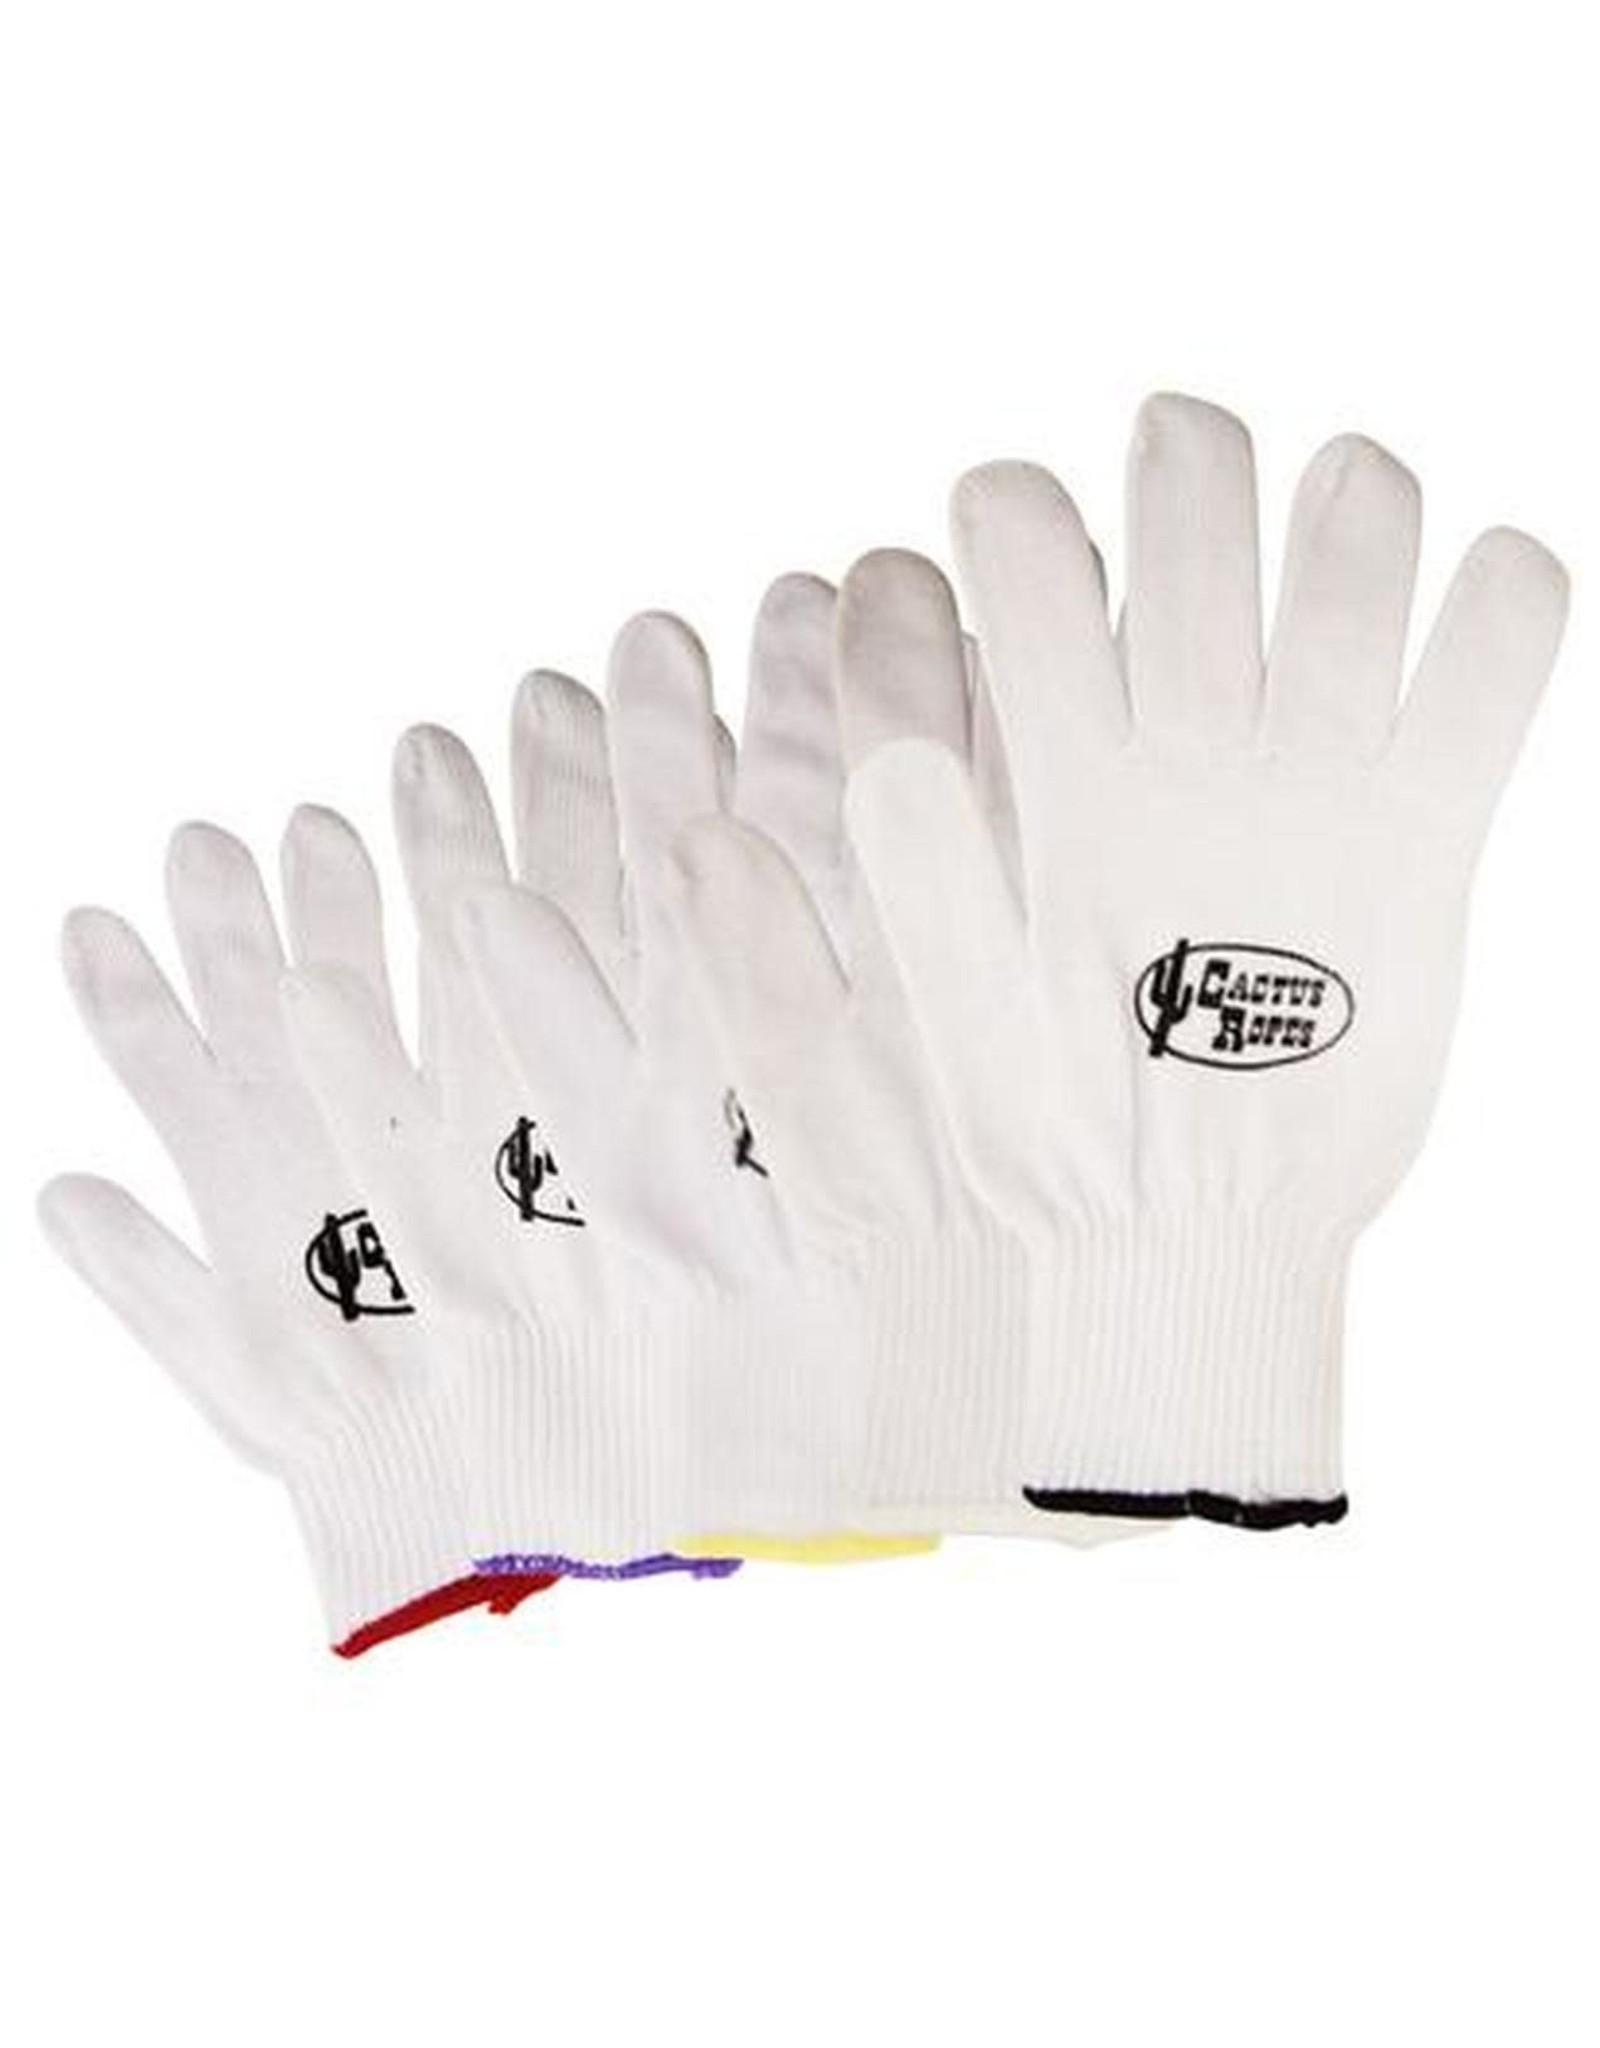 Cactus Ropes White Cotton Gloves Cactus - X-Small - (Red)